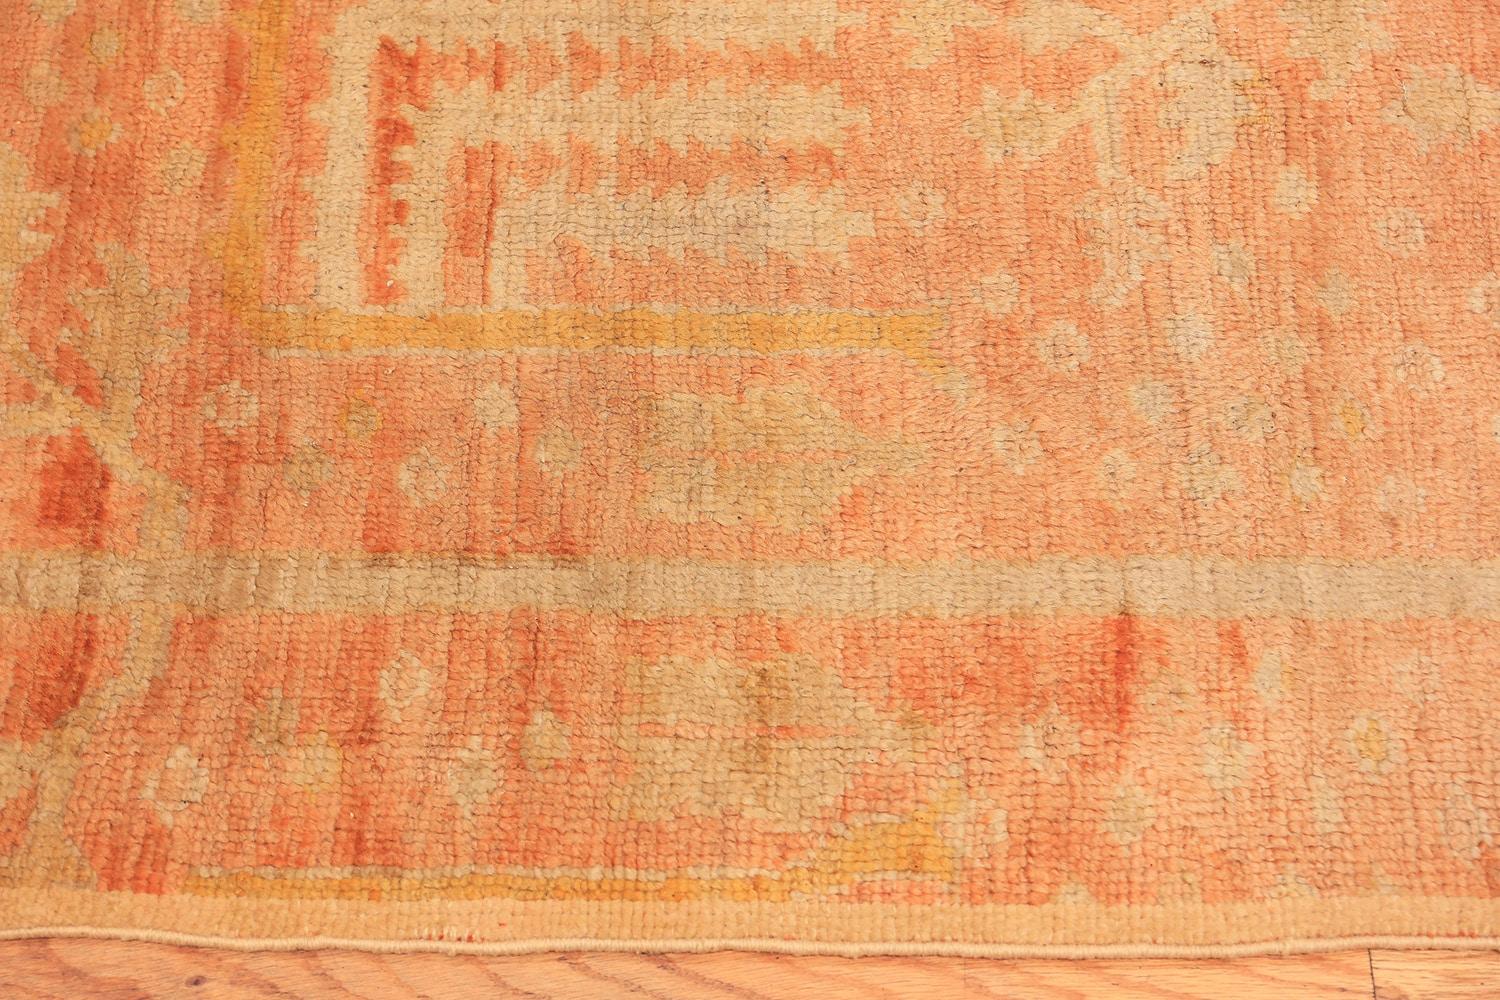 A beautifully decorative and warm antique Turkish Oushak runner rug, country of origin / rug type: antique Turkish rug, date: circa 1900, size: 2 ft 4 in x 15 ft 10 in (0.71 m x 4.83 m).